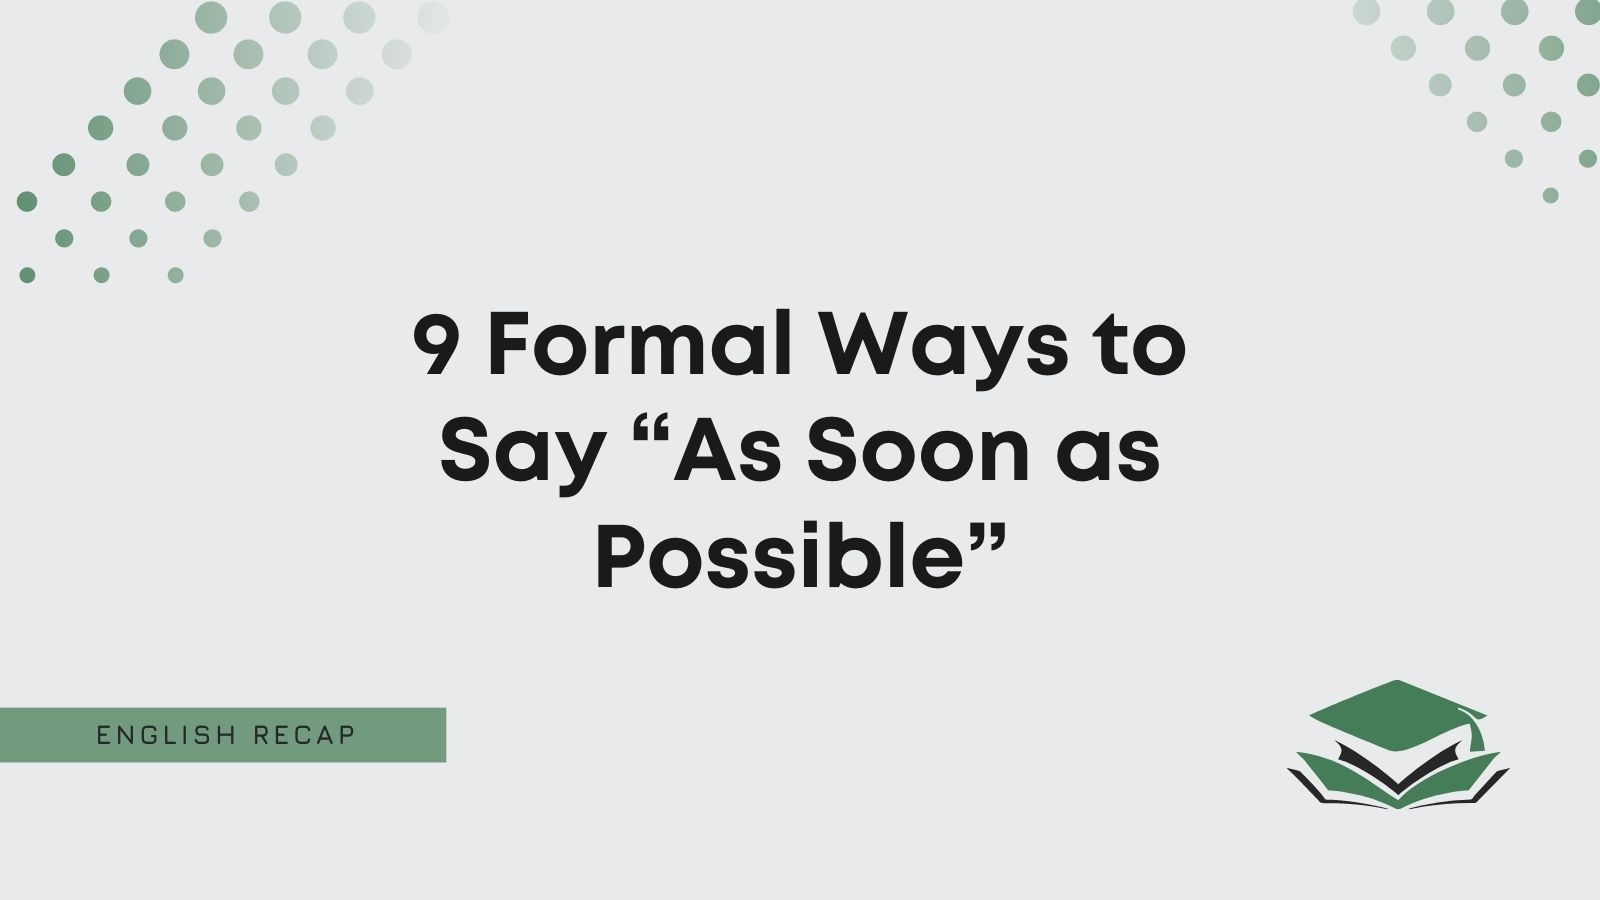 9 Formal Ways to Say “As Soon as Possible” - English Recap